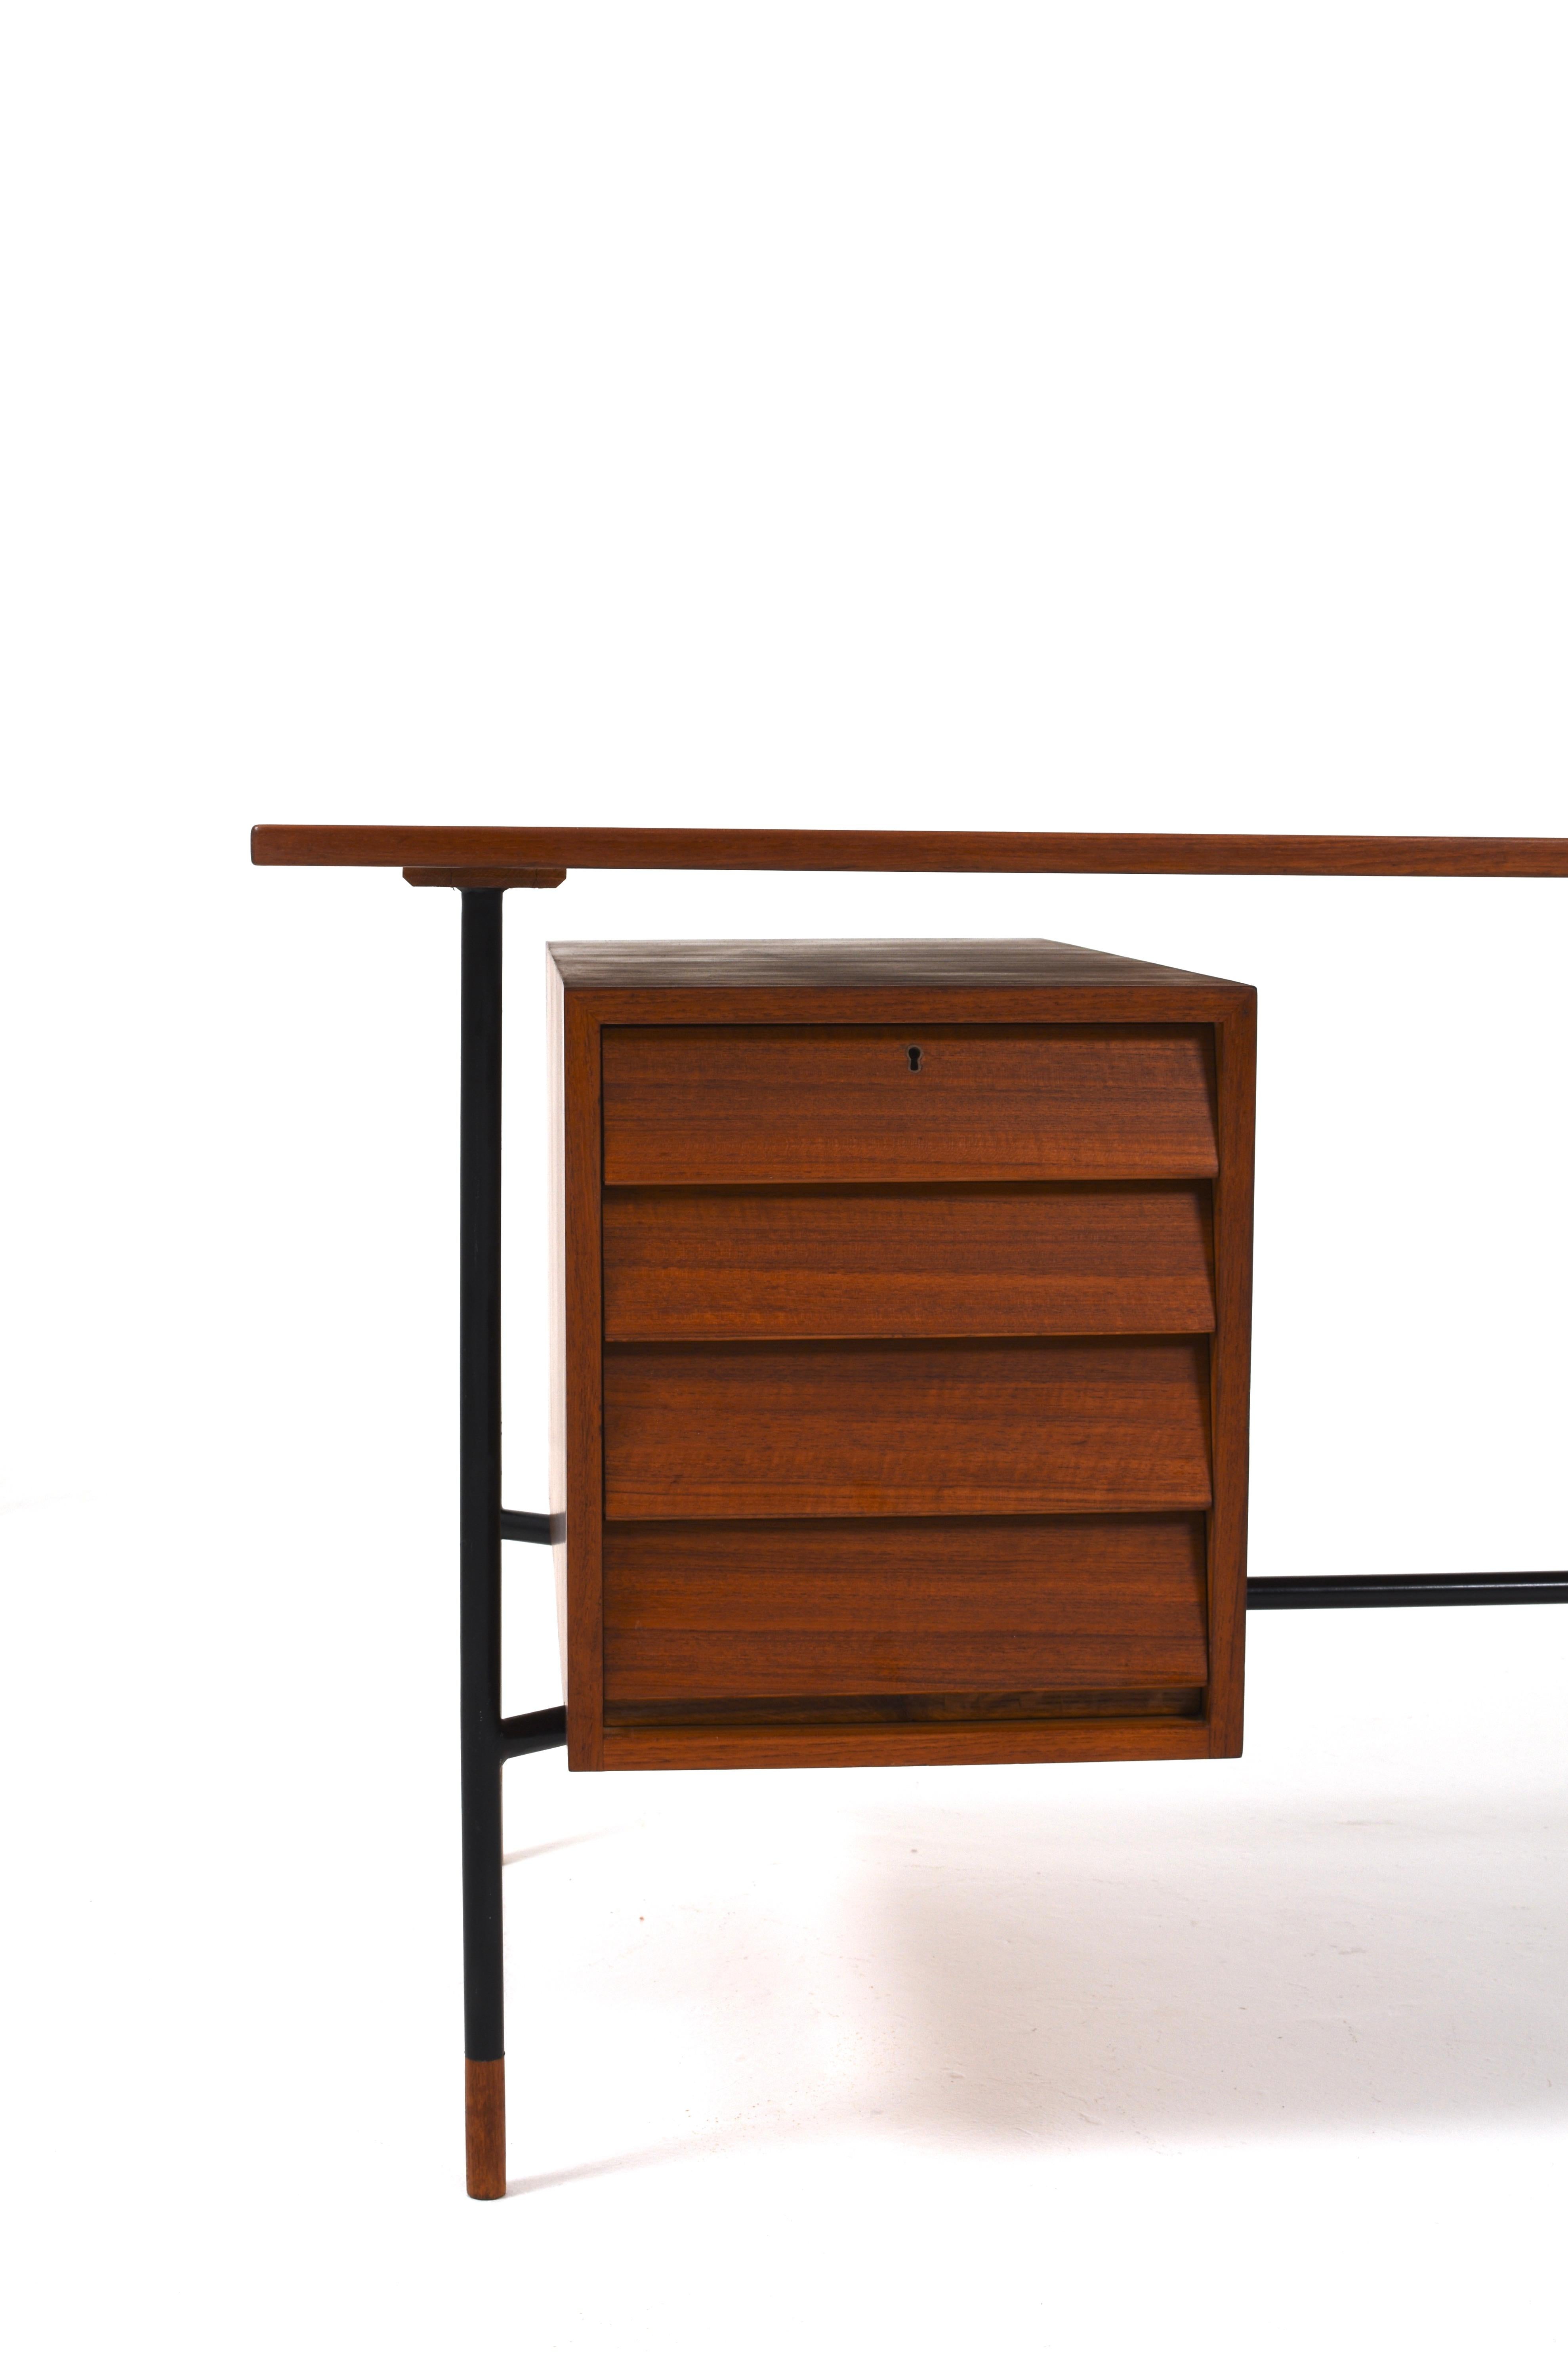 Rare Desk H-55 by Åke Hassbjer in teak and steel base, 1950s For Sale 7